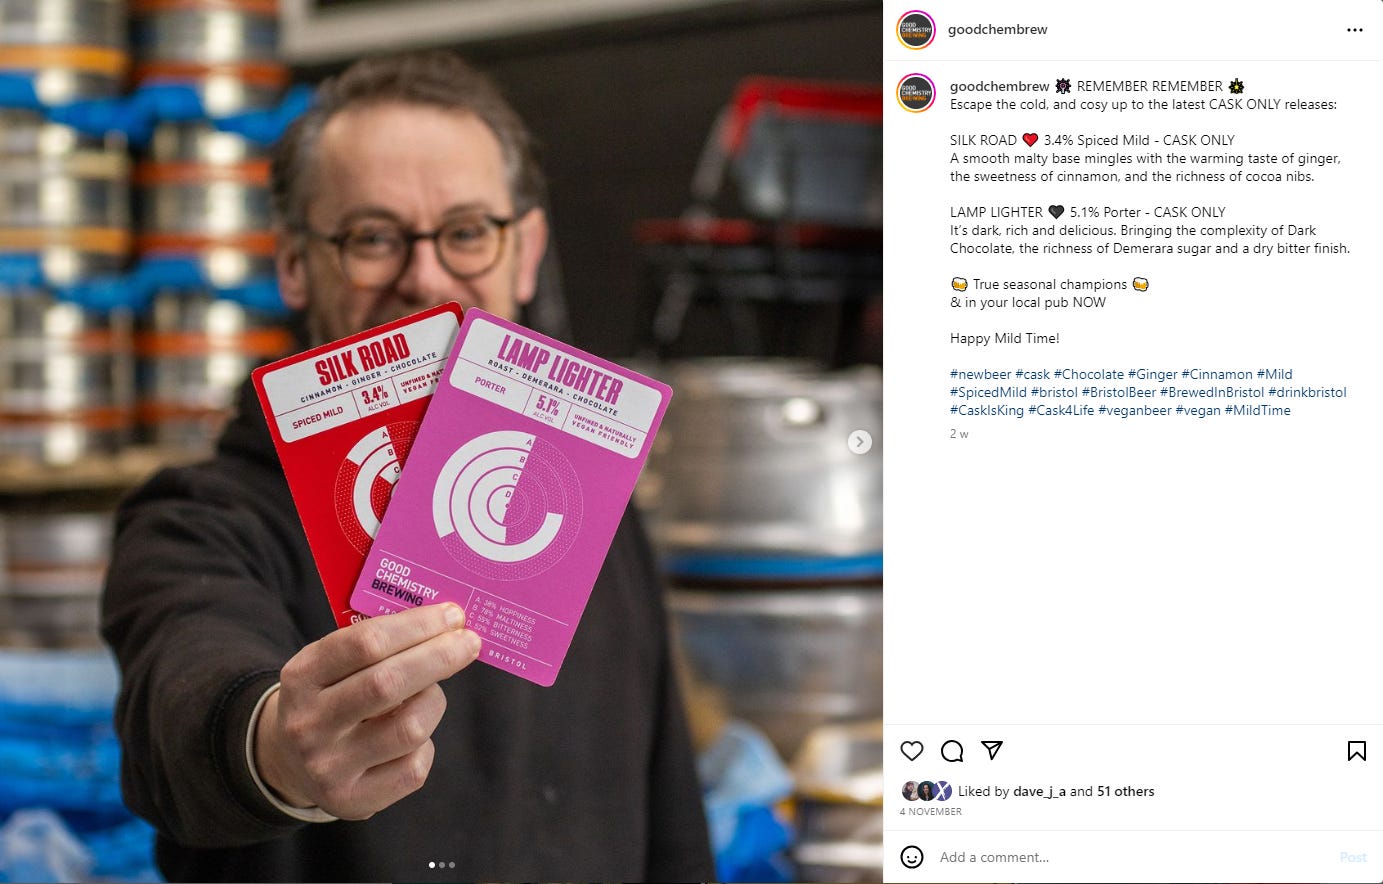 An Instagram post from Good Chemistry announcing the launch of its mild and porter, with brewer Bob Cary holding the pumpclips.